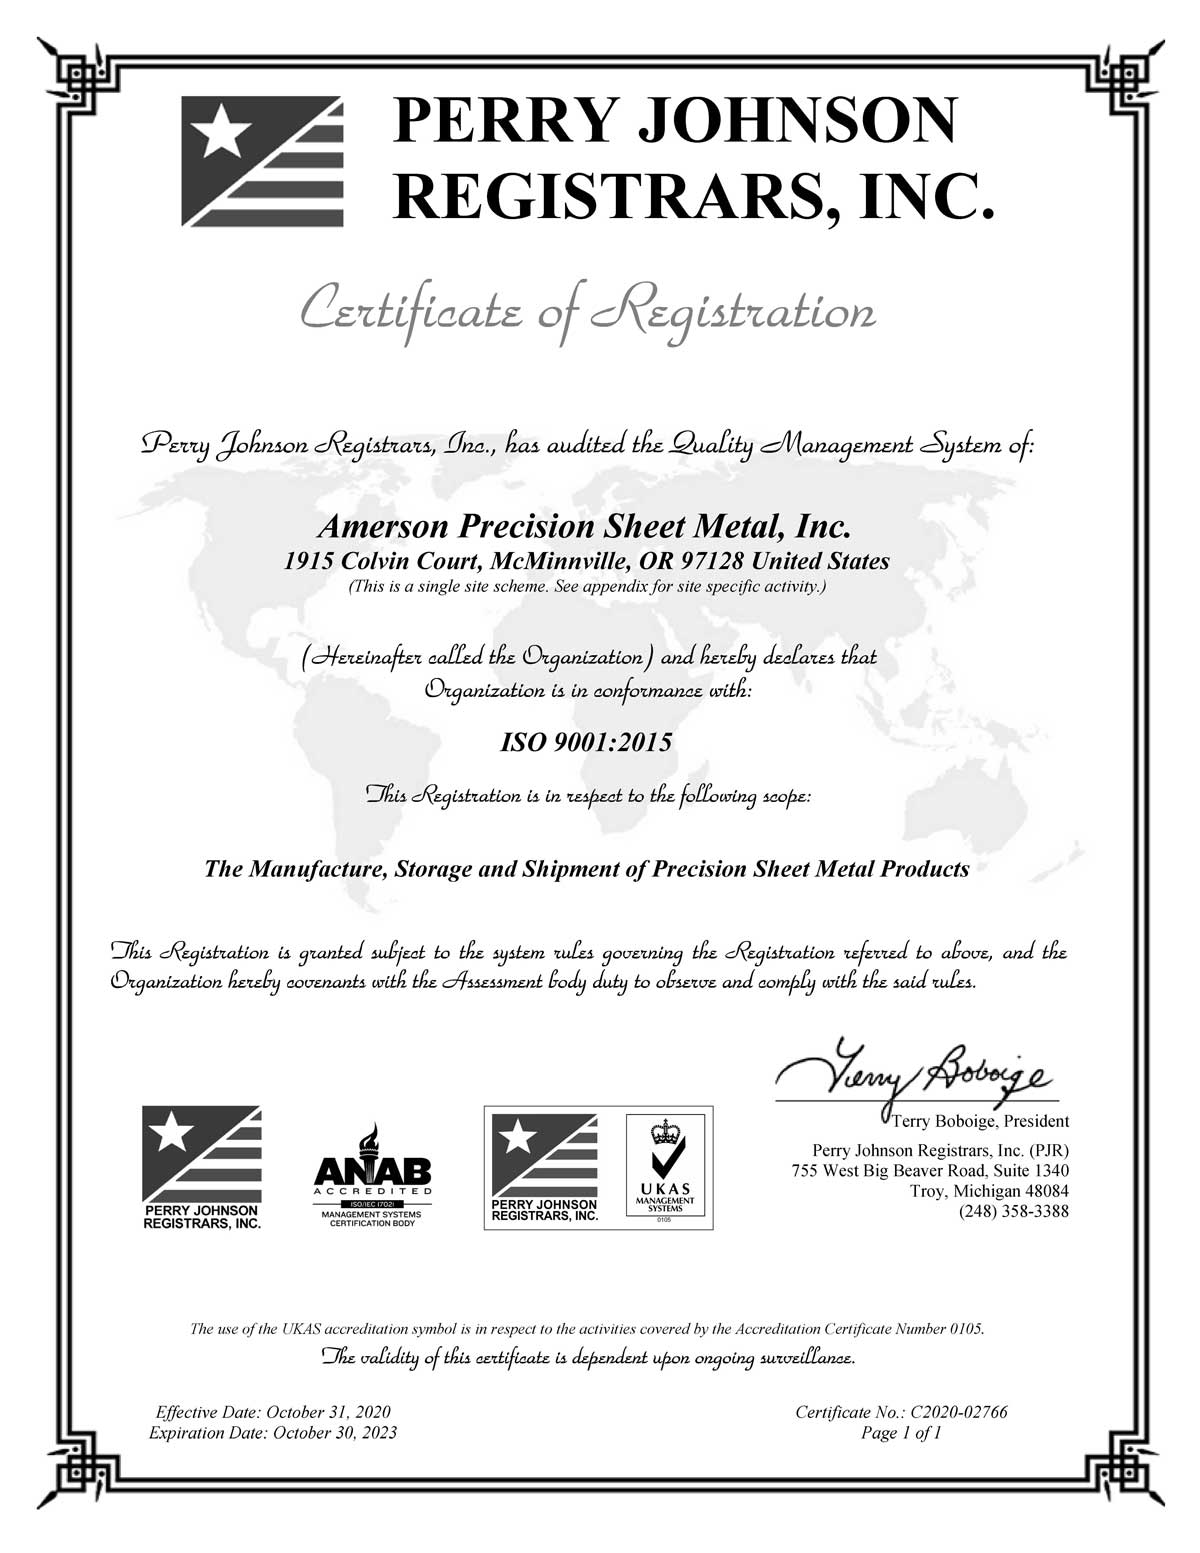 Amerson Precision Sheet Metal, Inc. - Certificate of Registration from Perry Johnson Registrars, Inc.